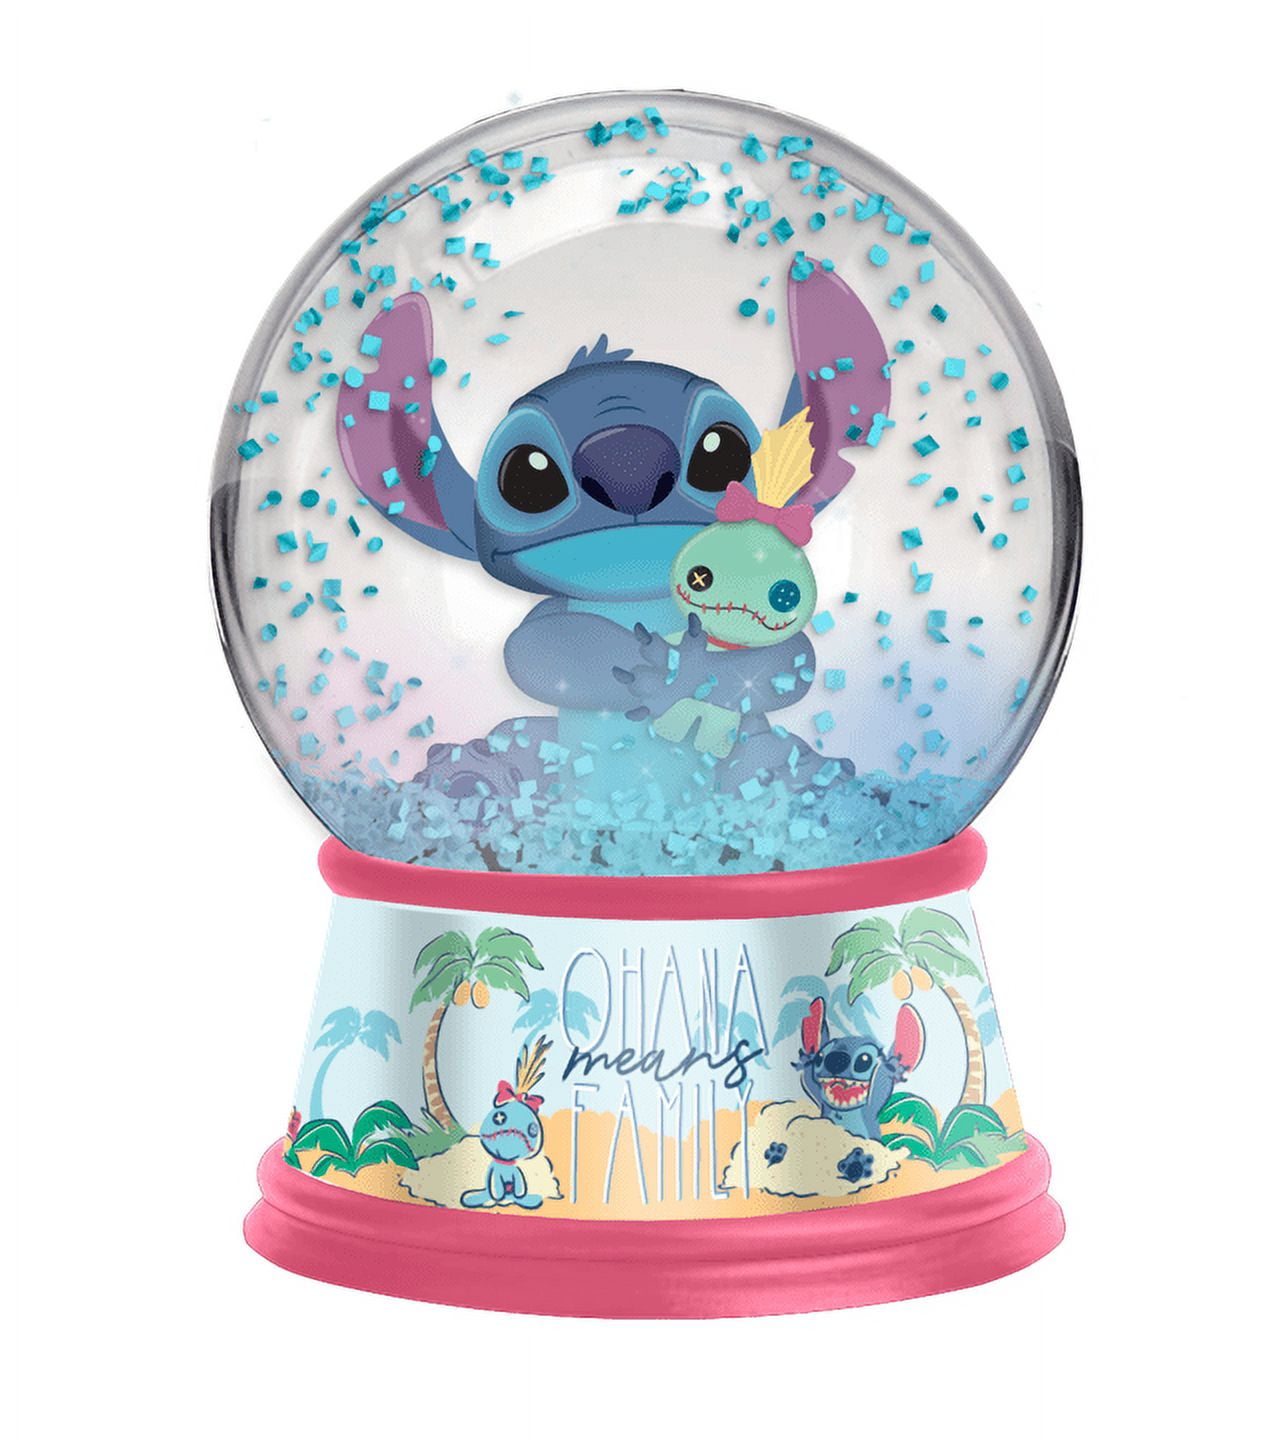 👽 STITCH SNOW GLOBE 🏄‍♀️ Stunning Stitch Snow Globe available in store!  We only have a couple in stock but may be able to order in more!, By Geeks  & Gamers